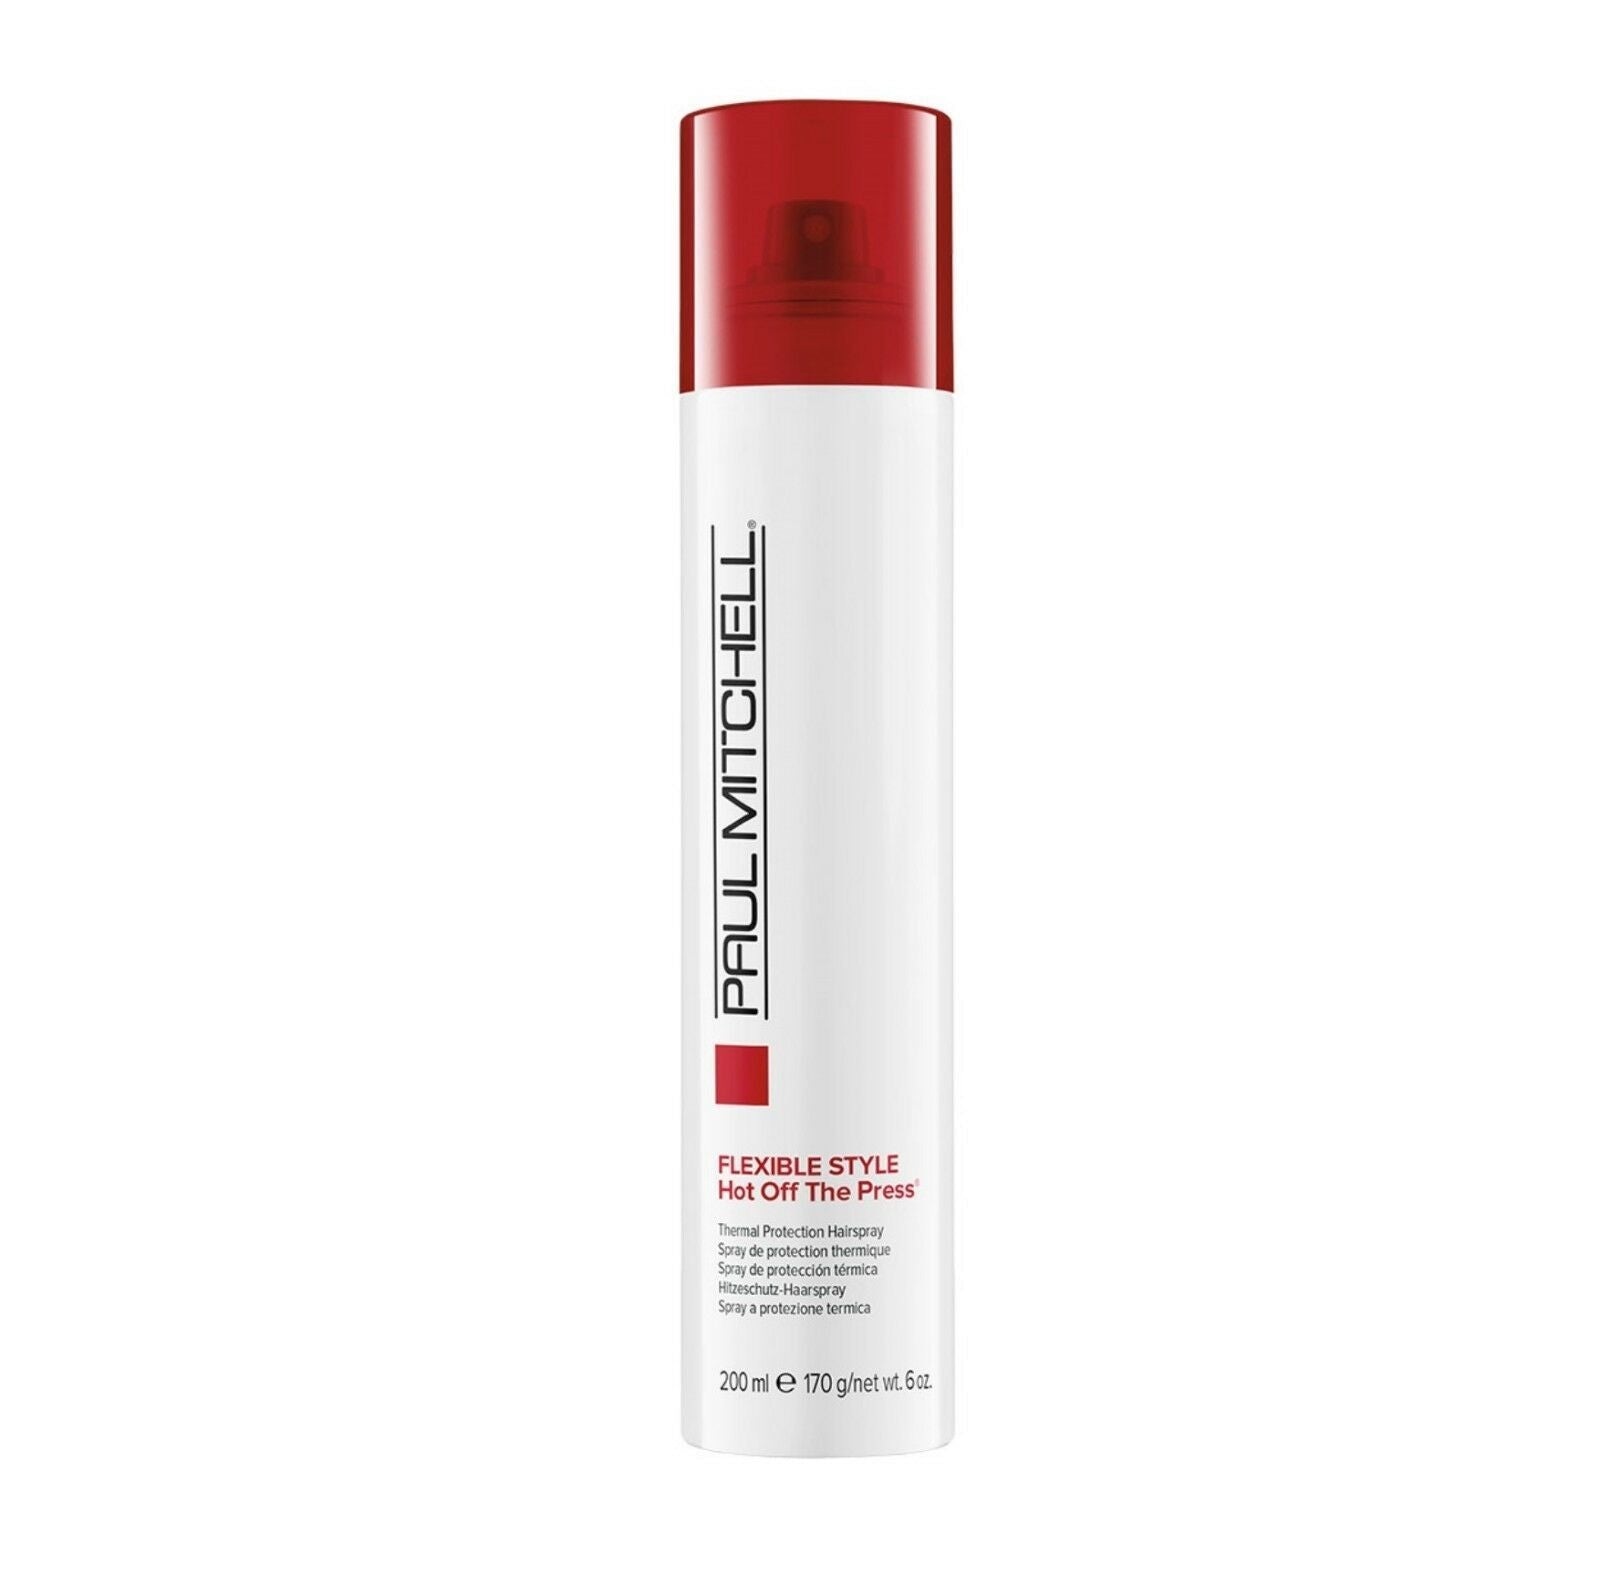 iaahhaircare,Paul Mitchell FLEXIBLE STYLE  Hot Off The Press® Thermal Protection 1 x 200ml,Styling Products,Flexible Style Paul Mitchell